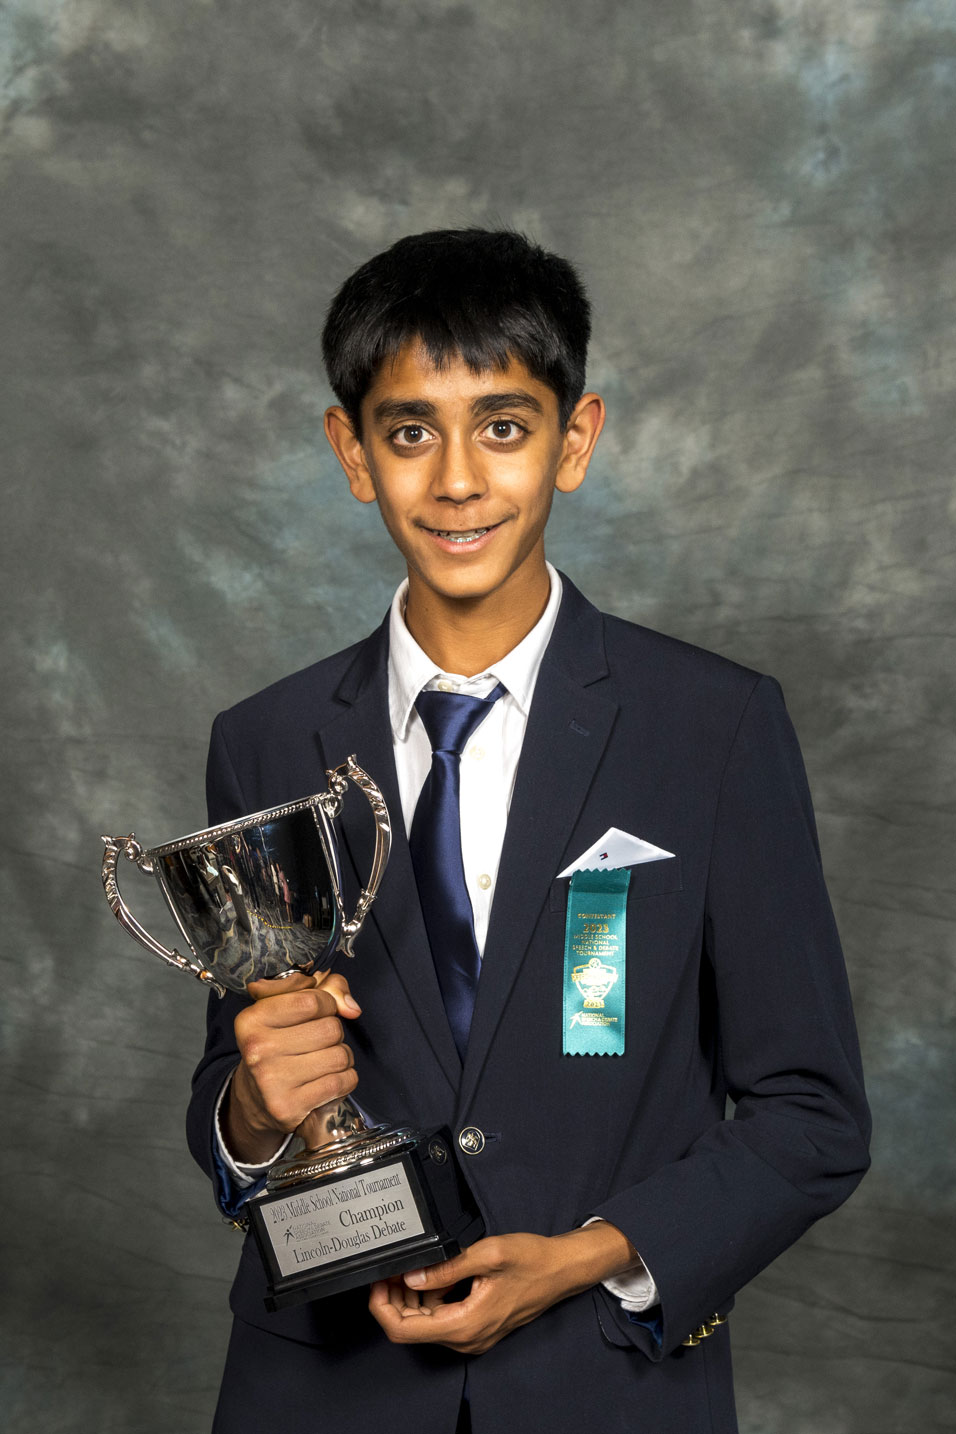 Siddhartha Daswani from The Harker Middle School in California
Coached by Hannah Wilson, Nathan Fleming, Jenny Achten, Greg Achten, and Scott Odekirk